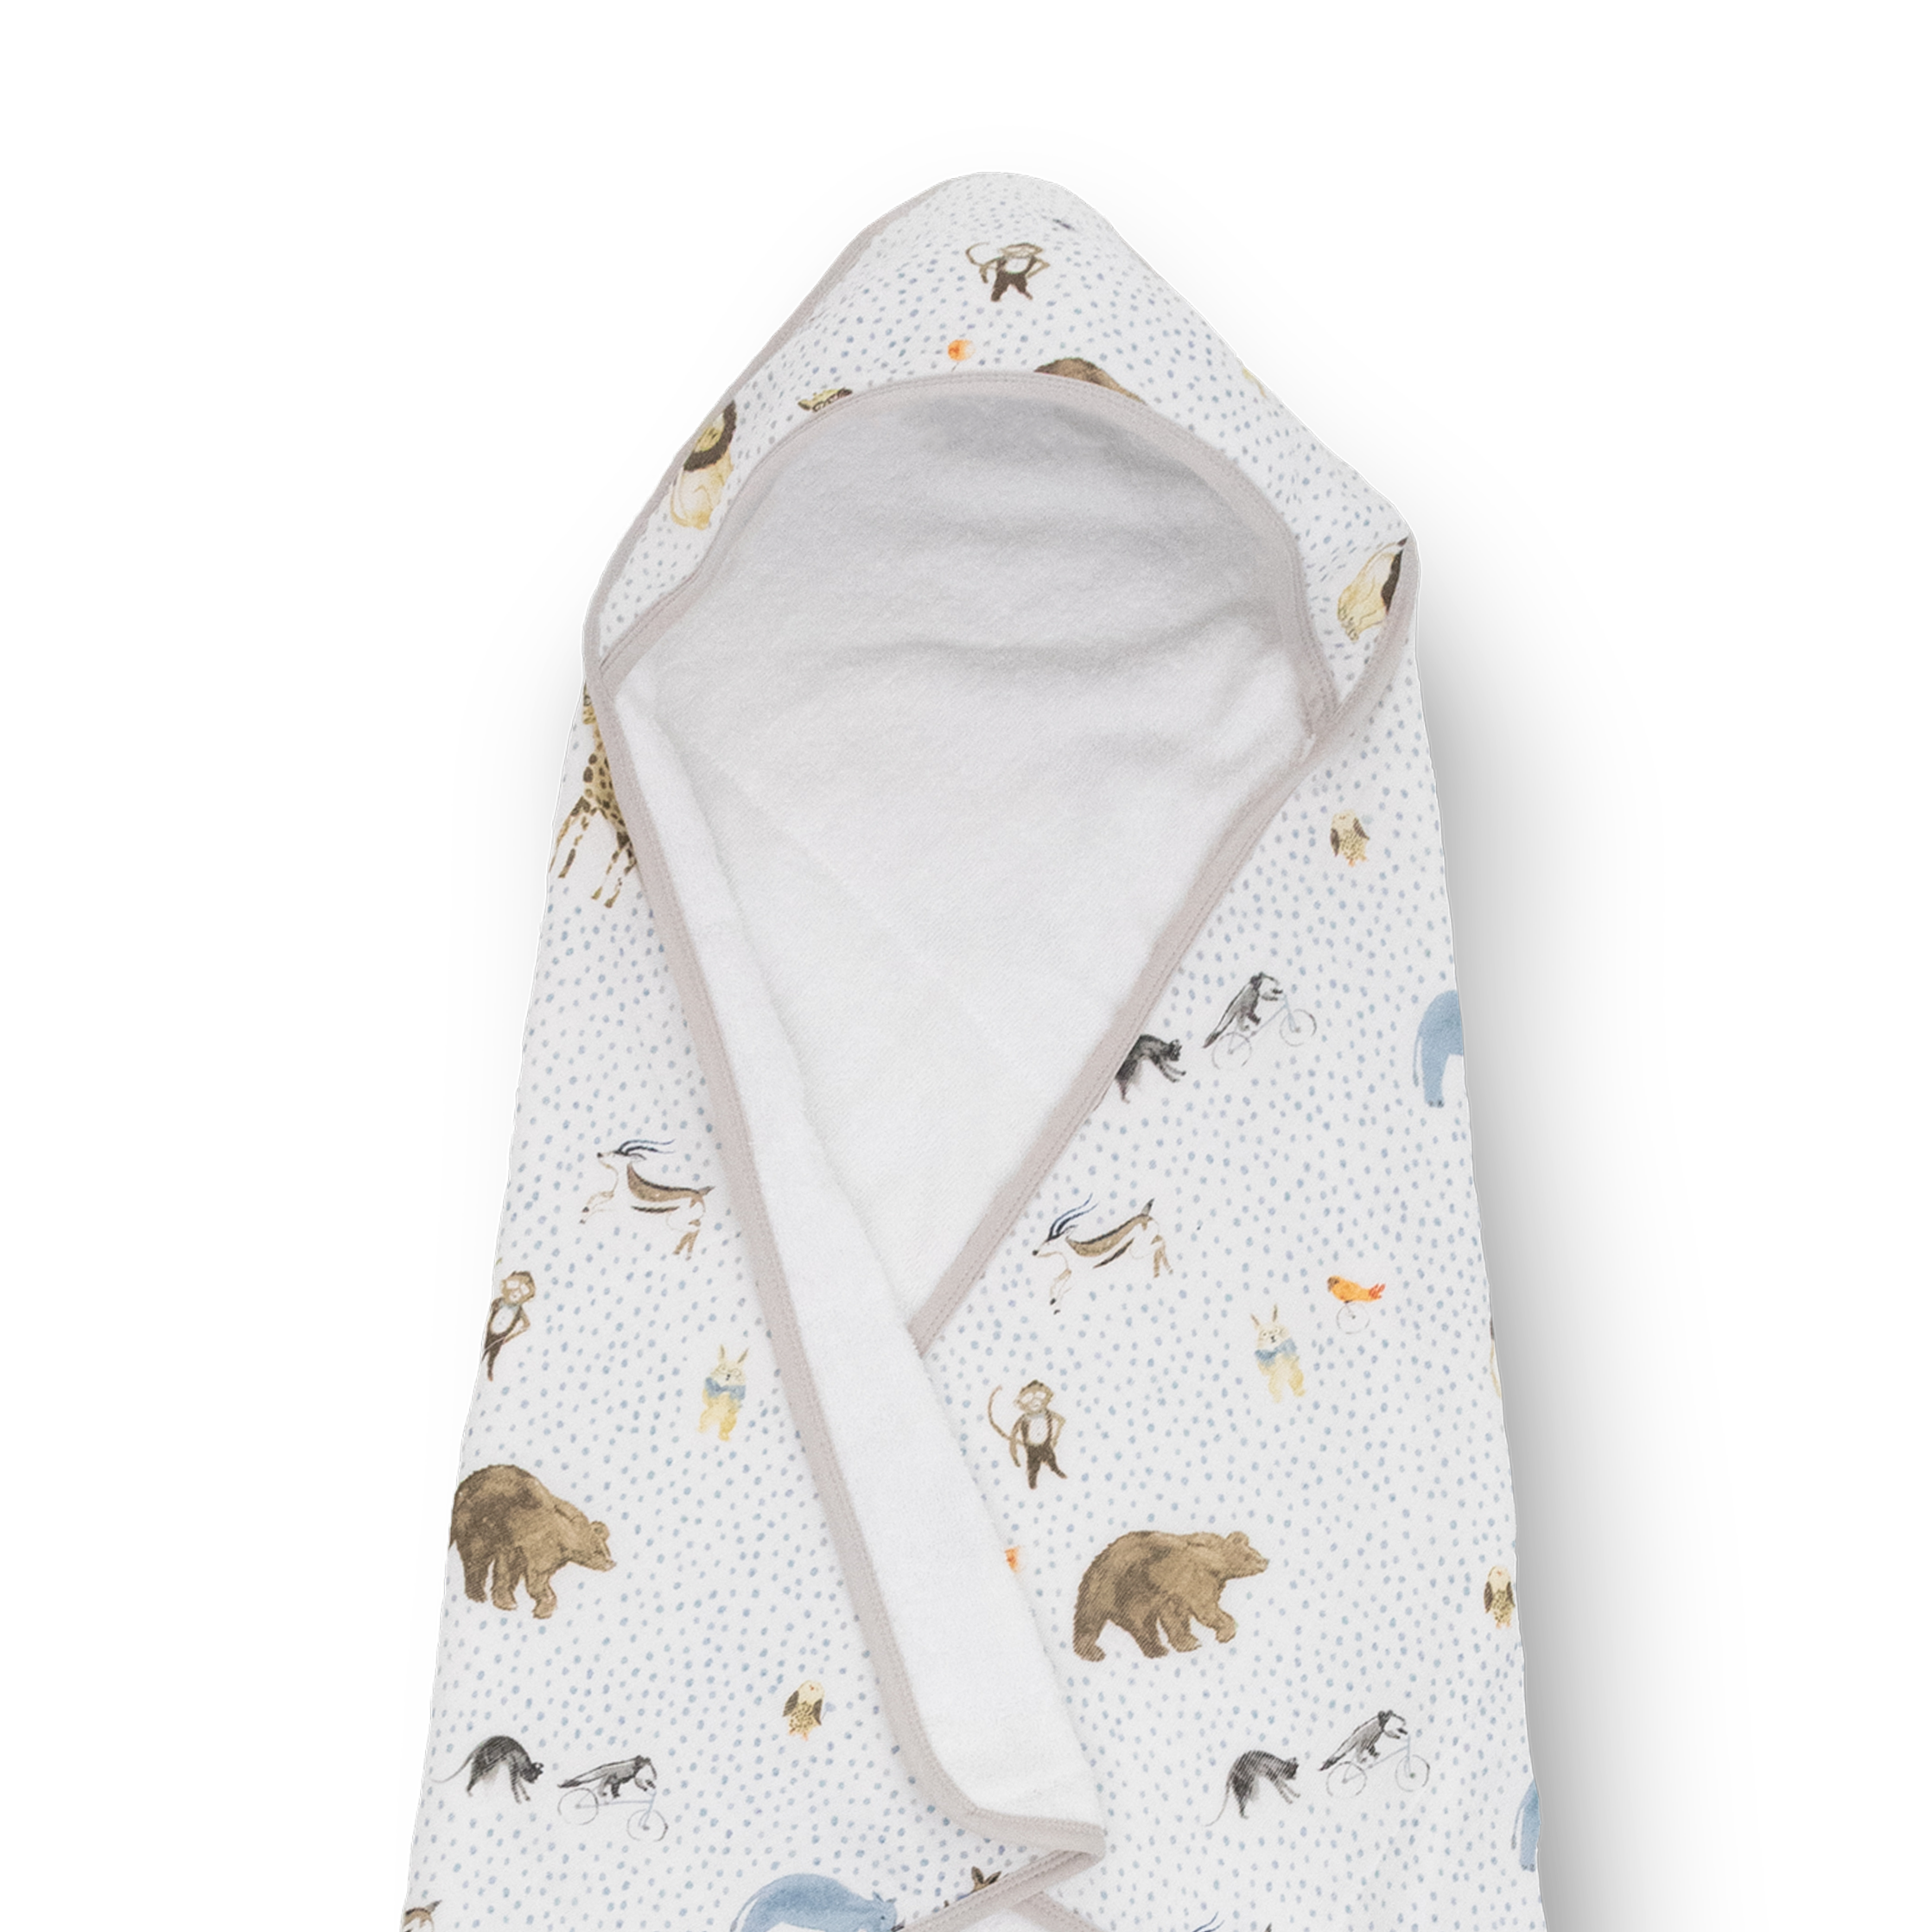 Infant Hooded Towel - Party Animals